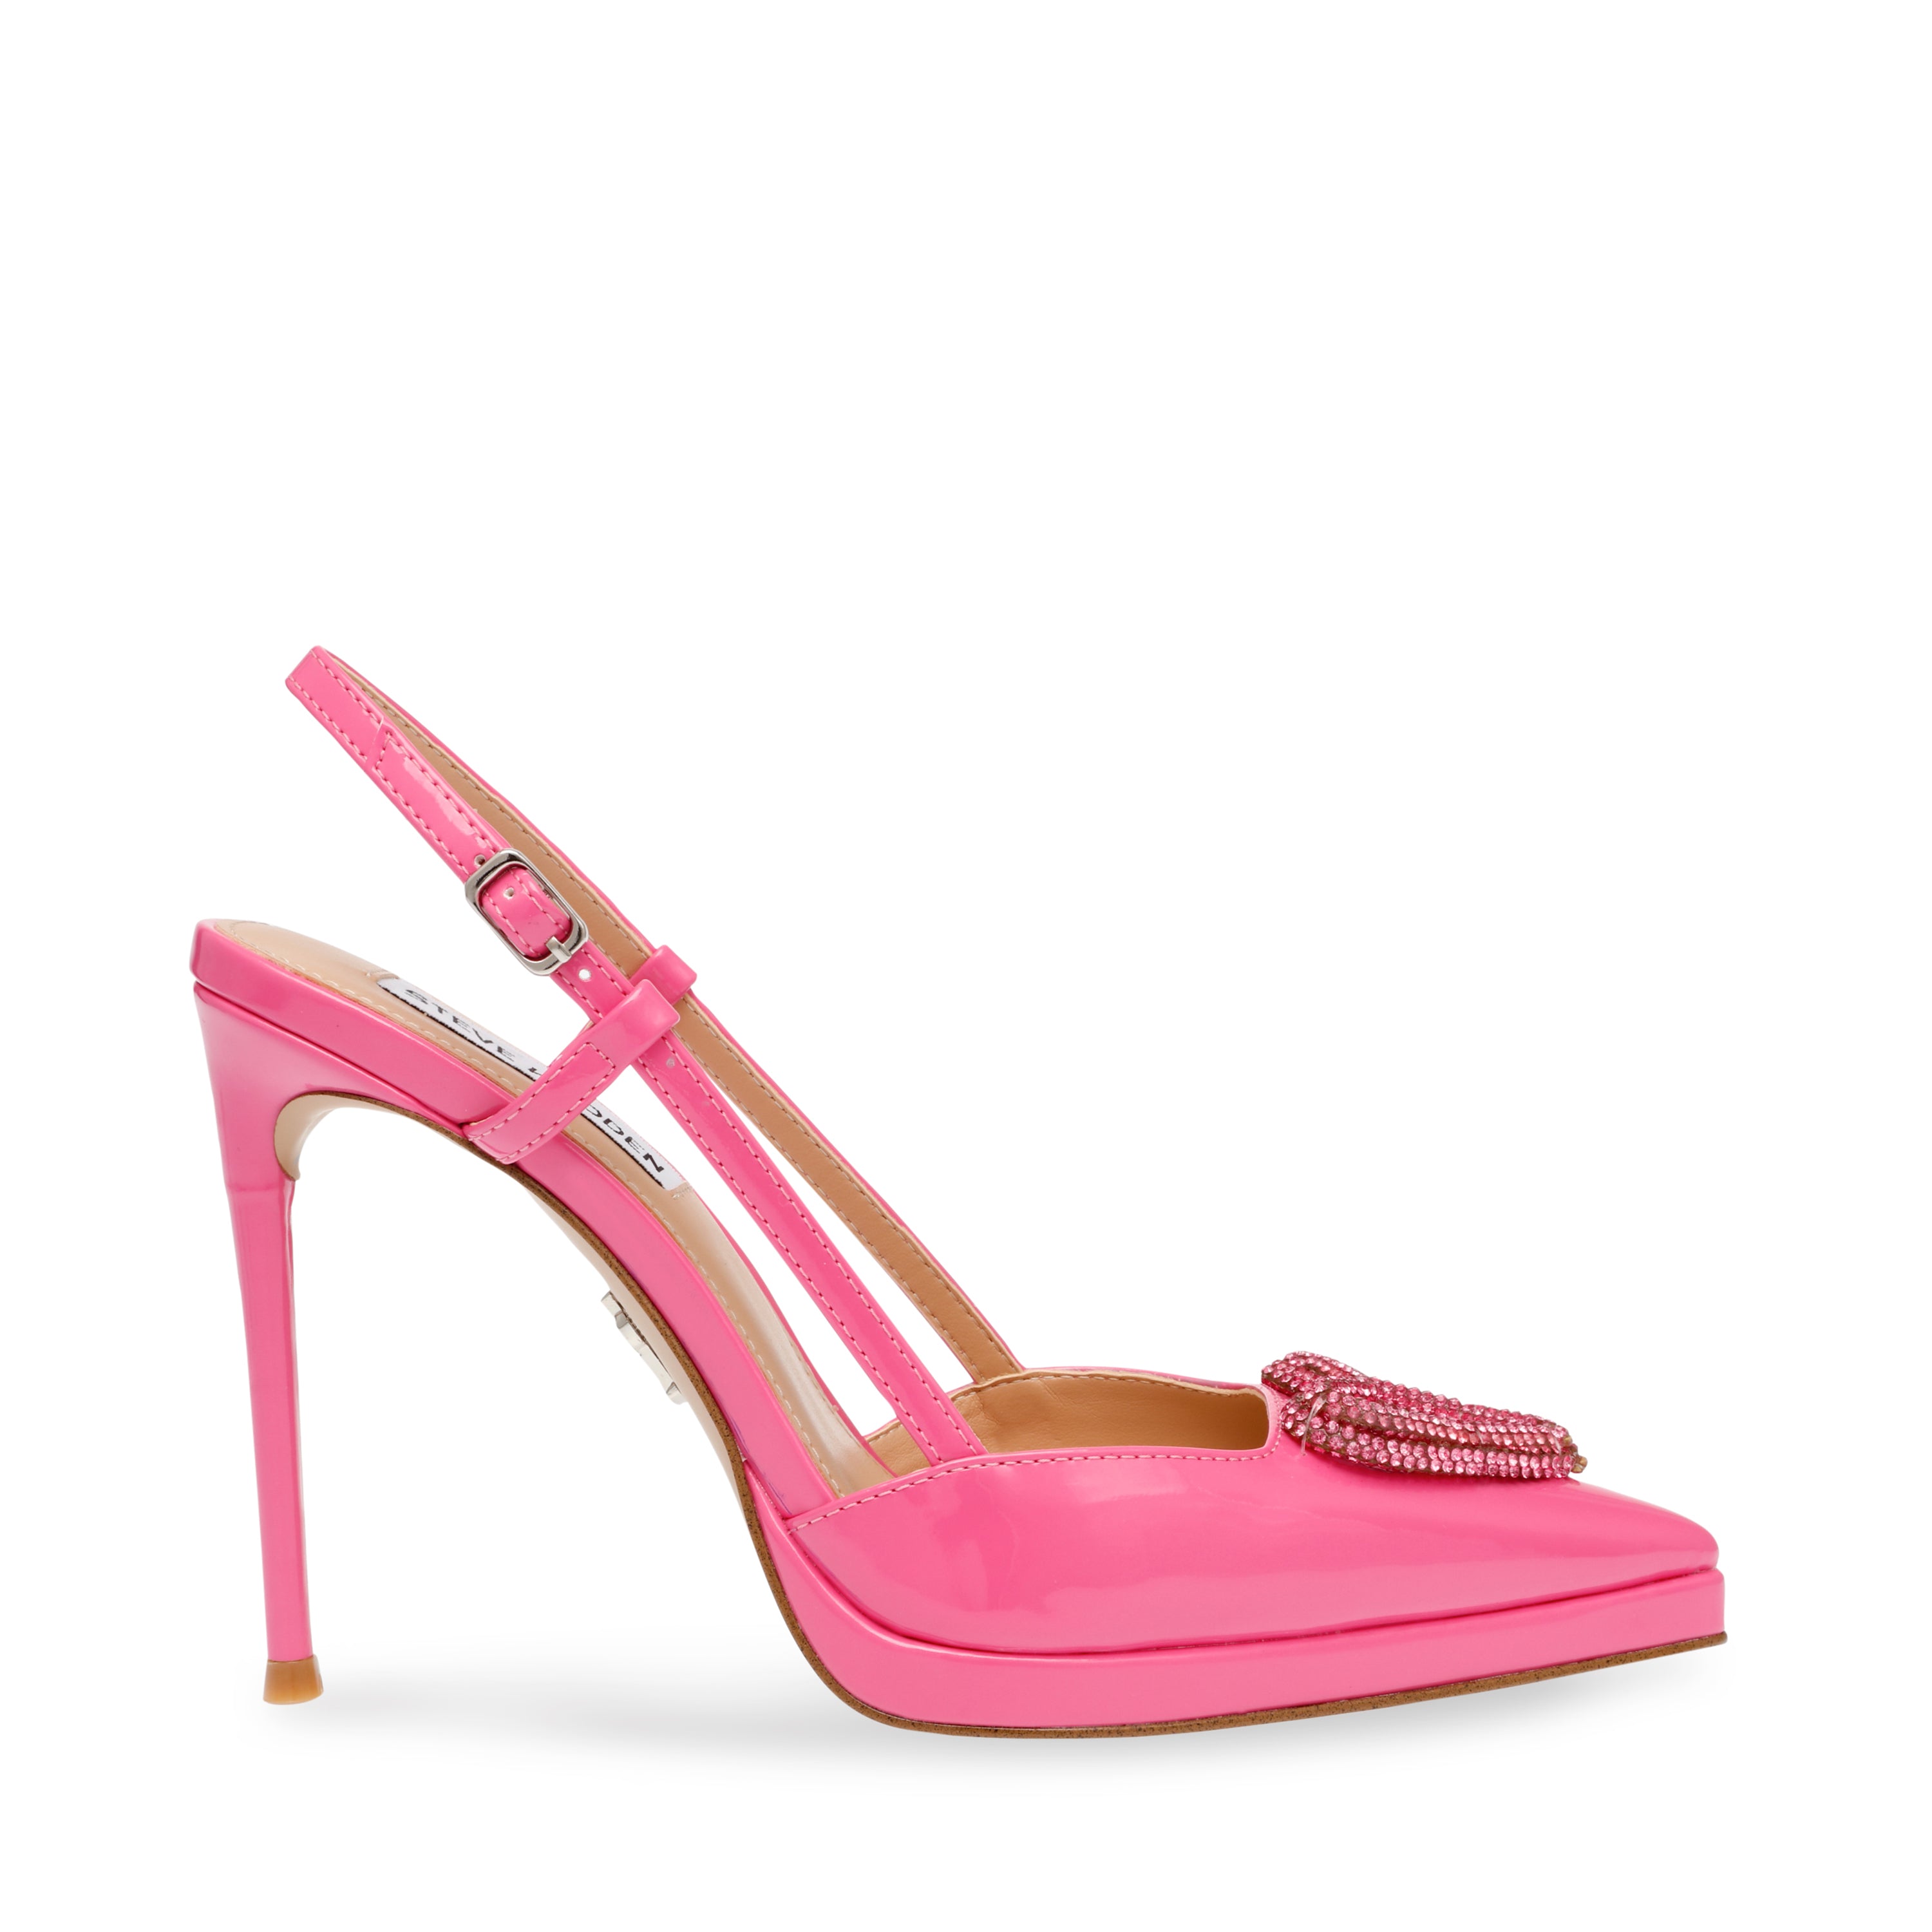 KIND-HEART PINK PATENT – Steve Madden South Africa